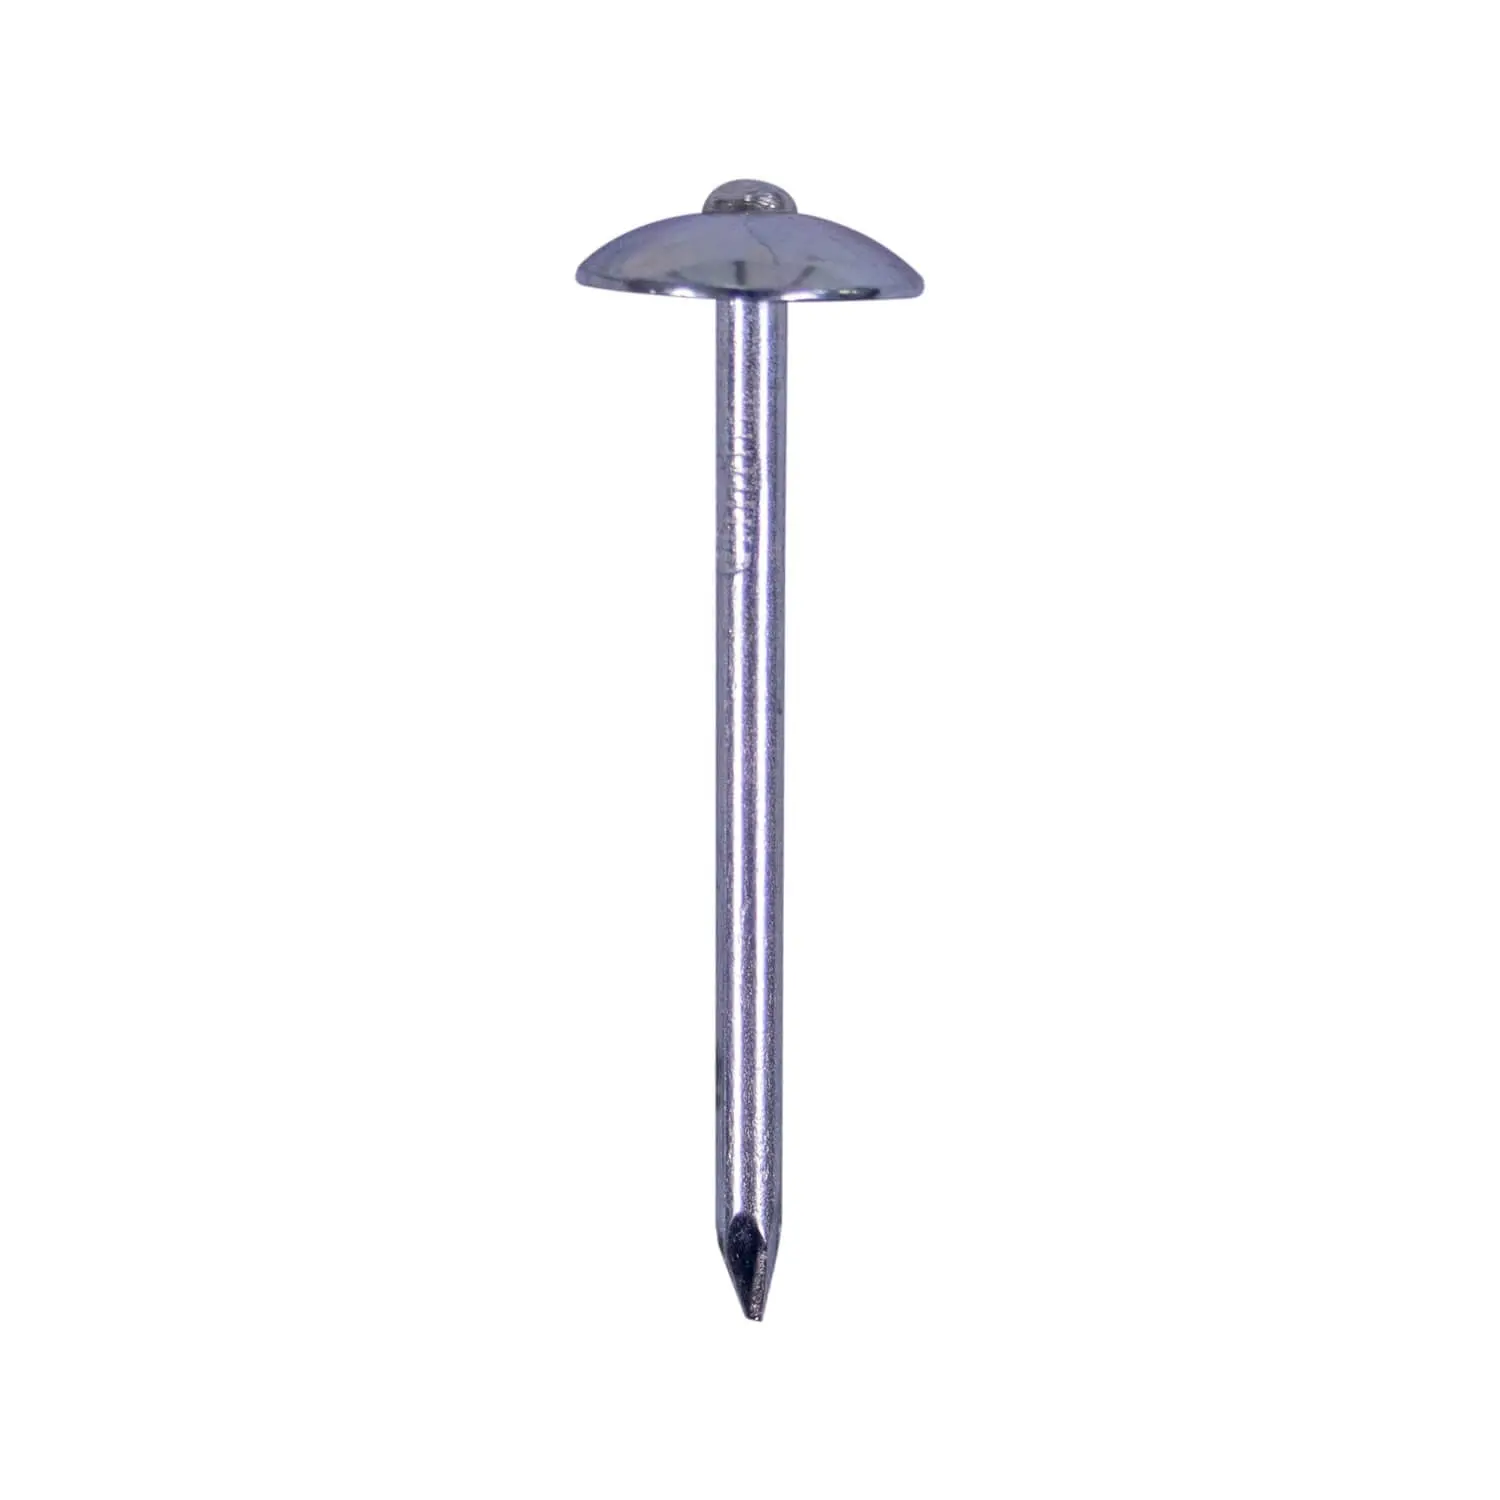 2.5inch bwg9 galvanized umbrella head roofing nails